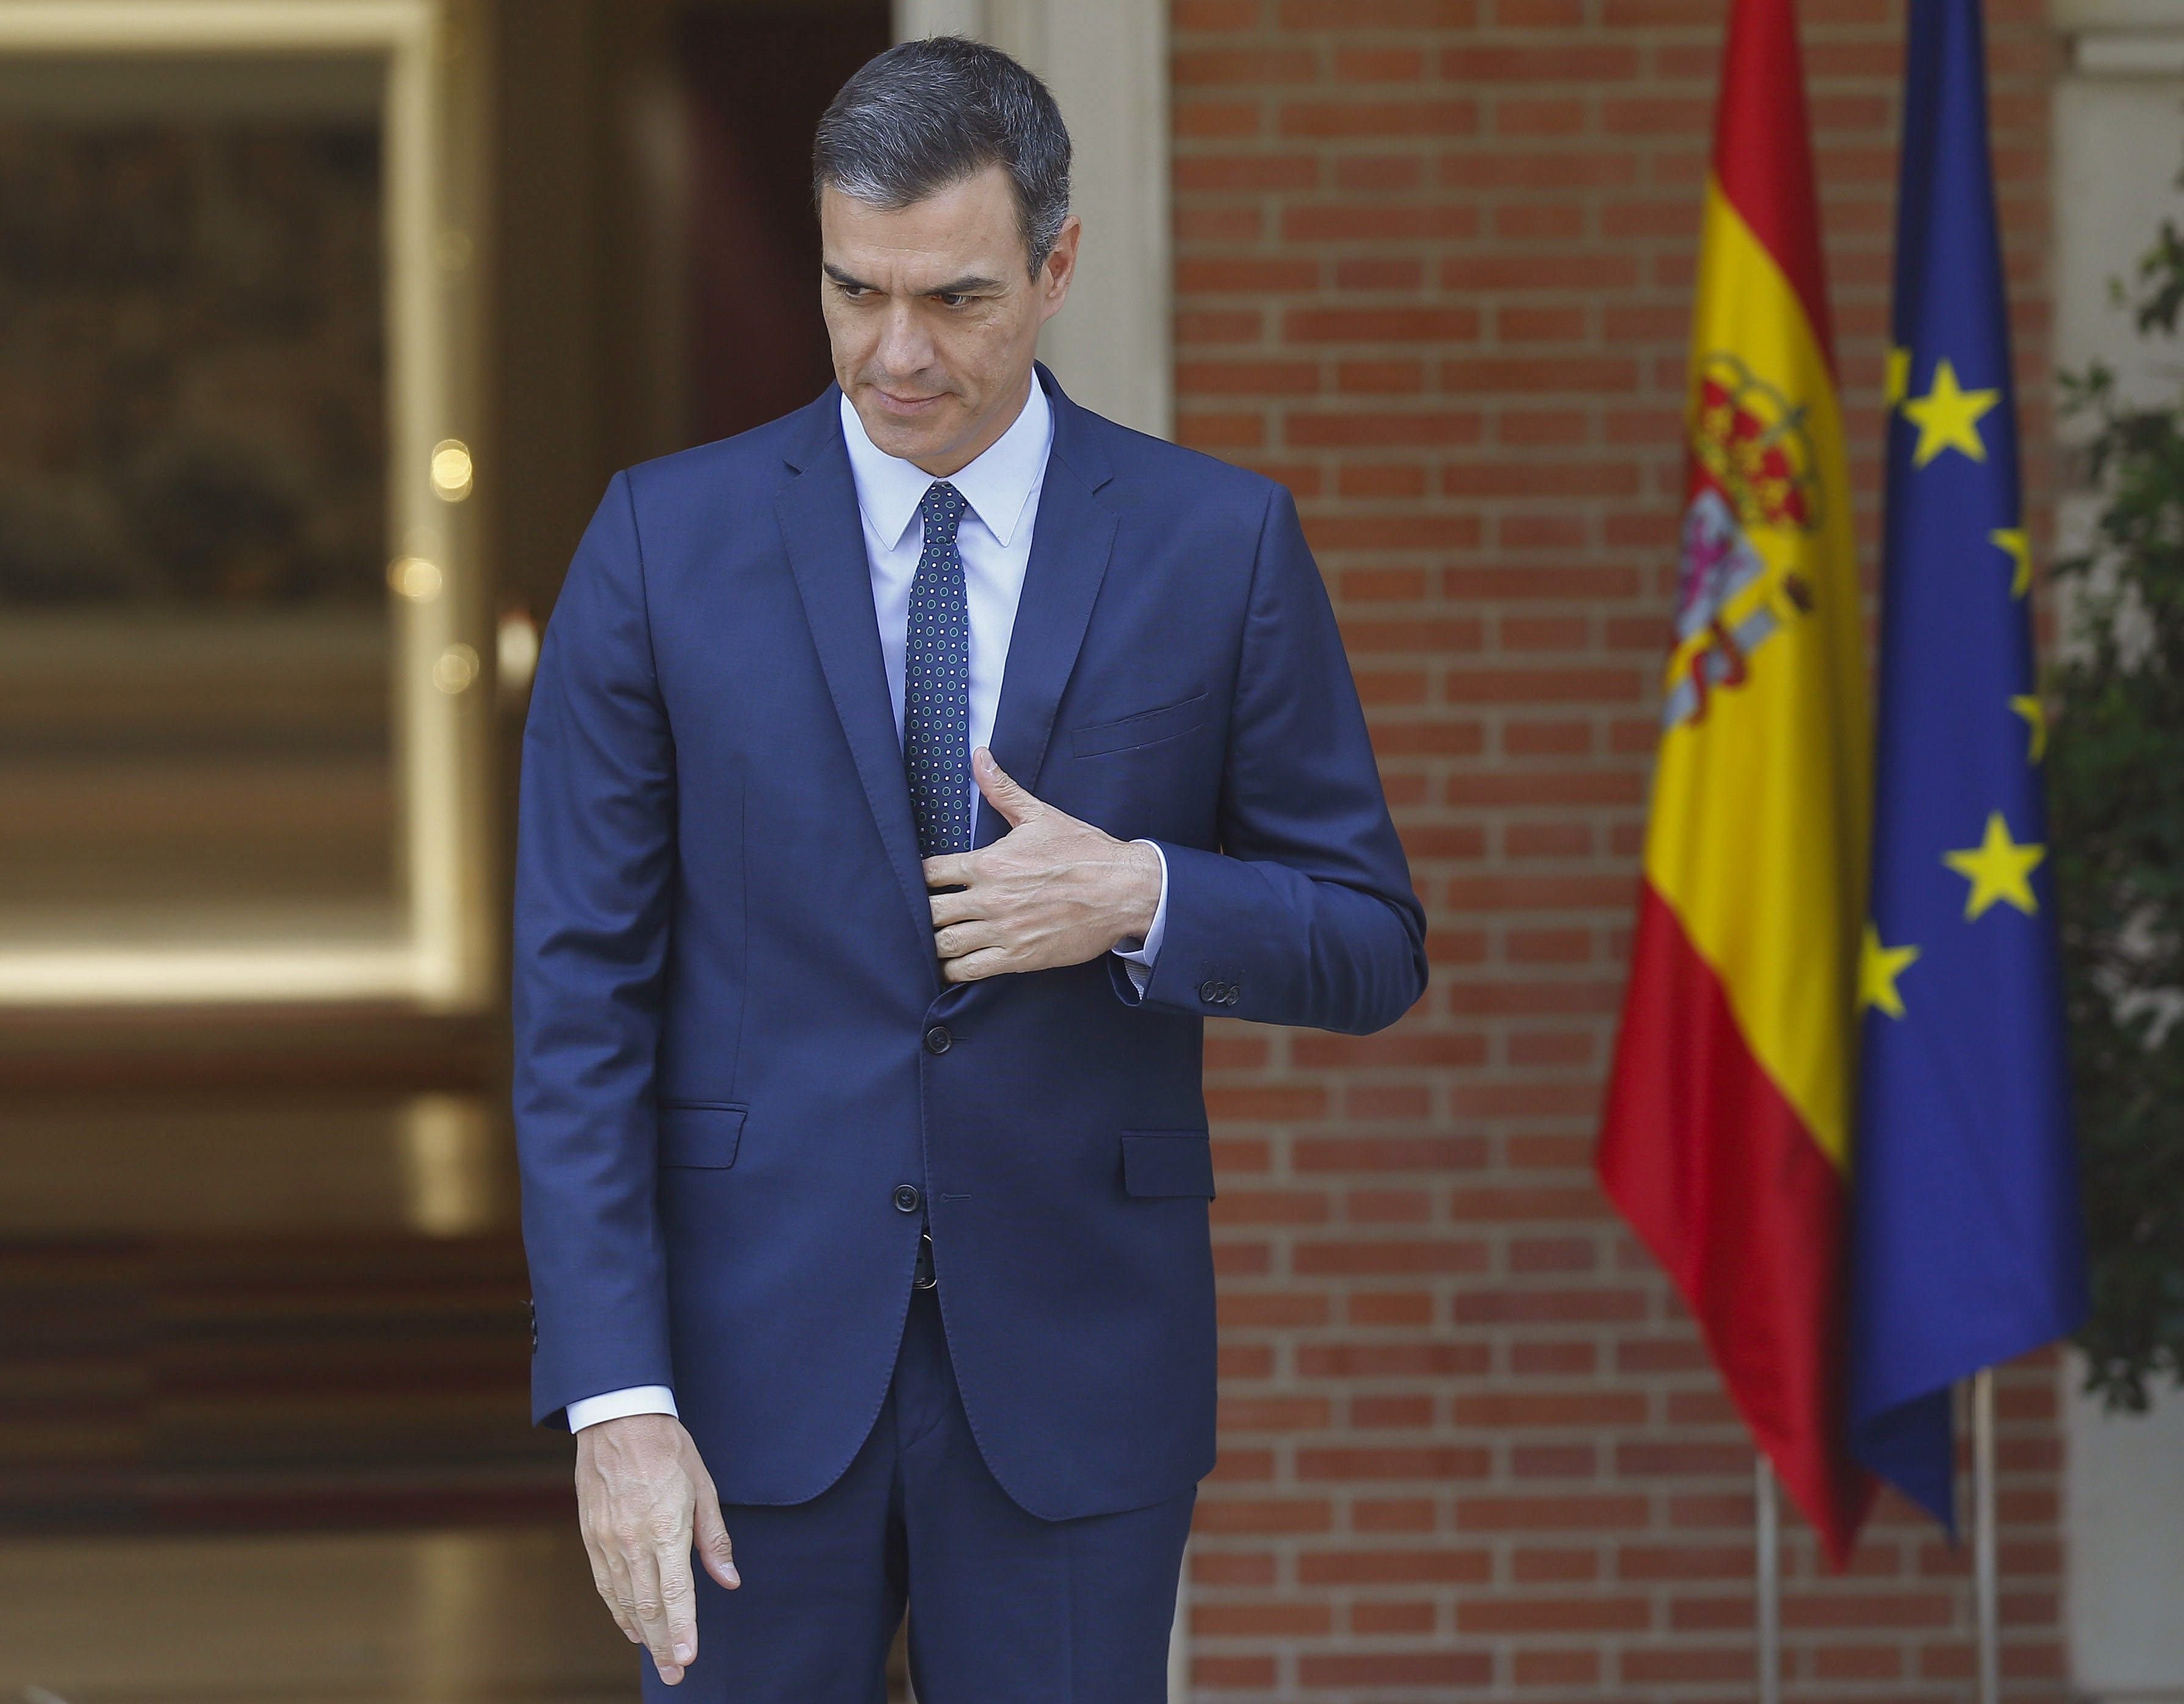 Spanish government's reply to Cuixart: no meeting and dialogue within the Constitution